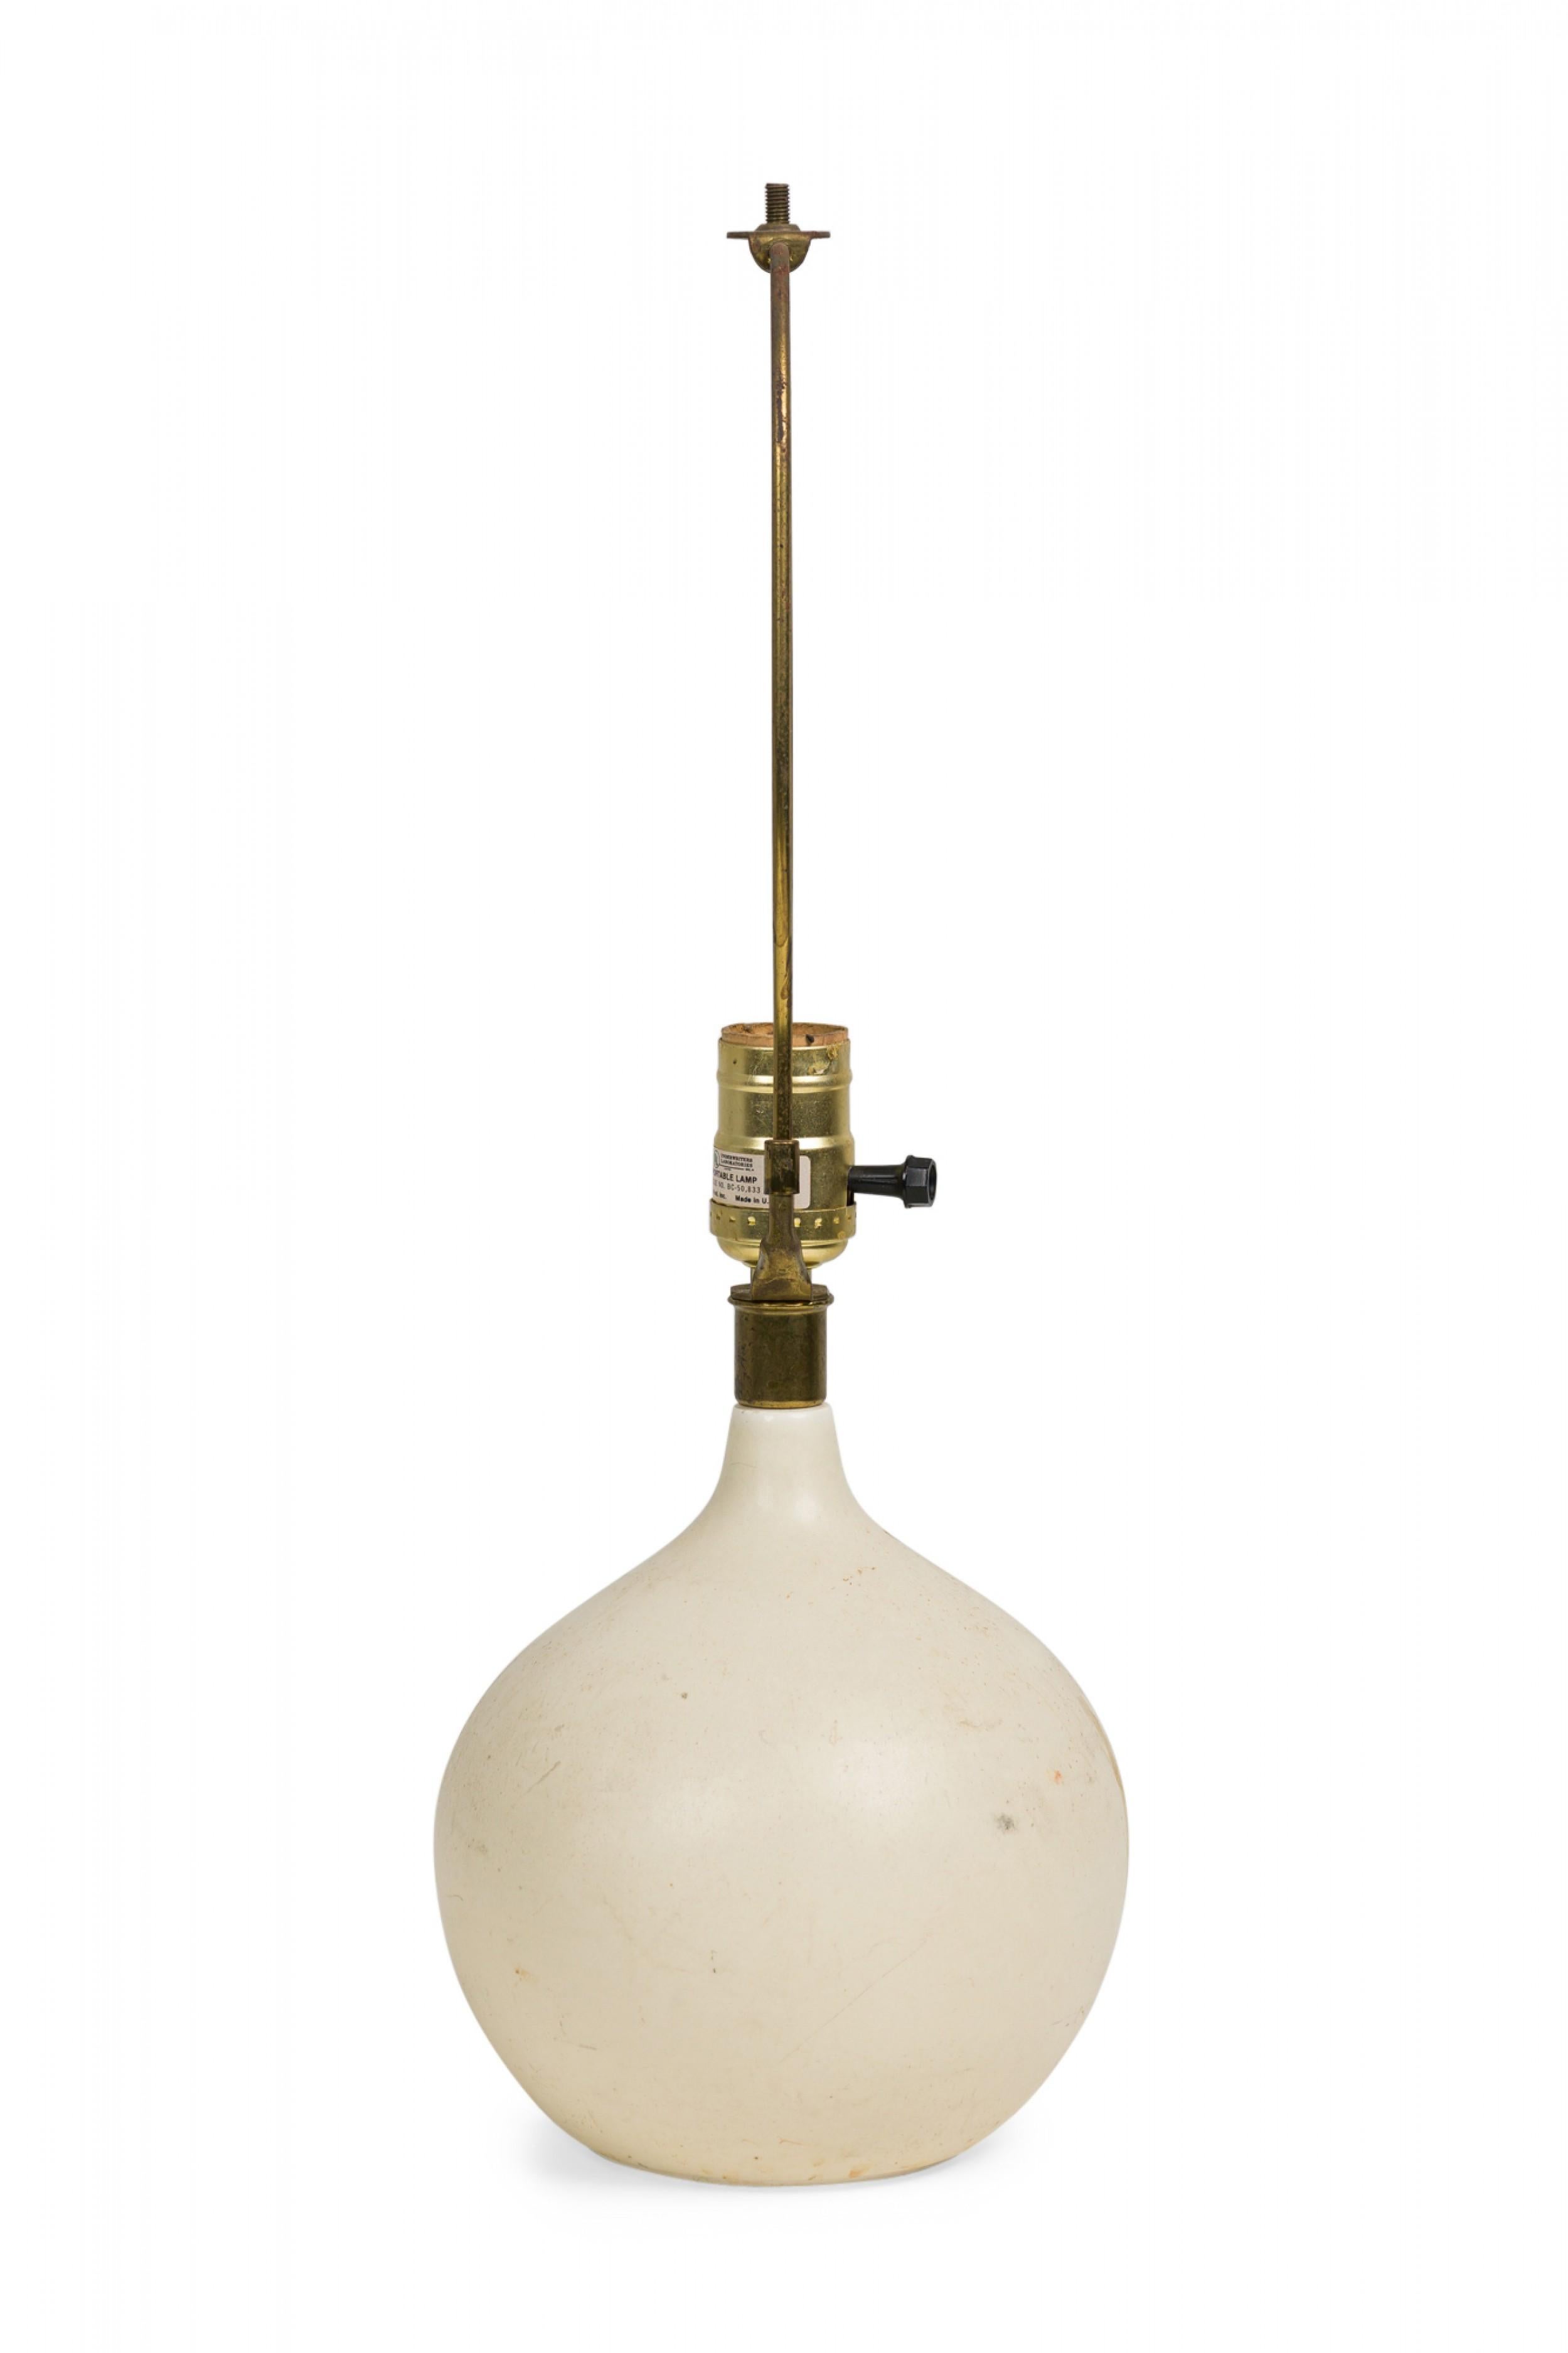 Midcentury (1960s) Danish ceramic bone stoneware table lamp in orb form with pinched neck featuring an extended brass functioning light switch socket plus harp, the body fired in a matte white glaze. (LOTTE AND GUNNAR BOSTLUND)